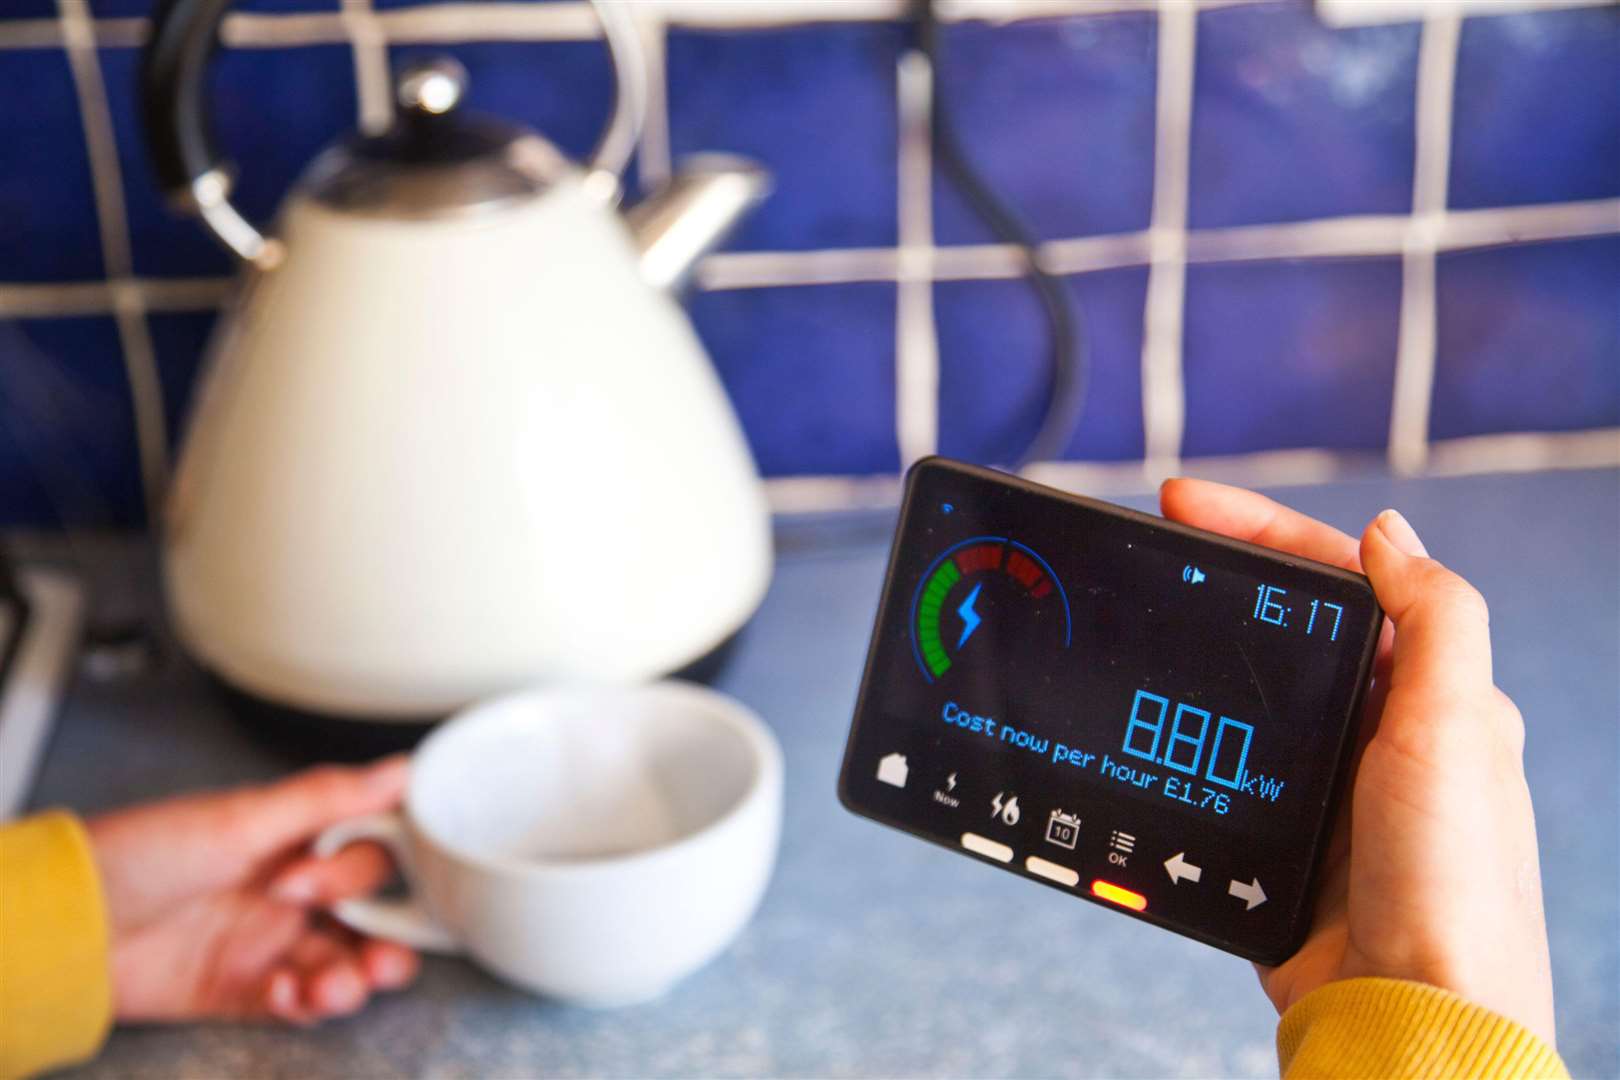 The National Grid is expected to reward people this week who are able to use less energy at peak times. Image: iStock.